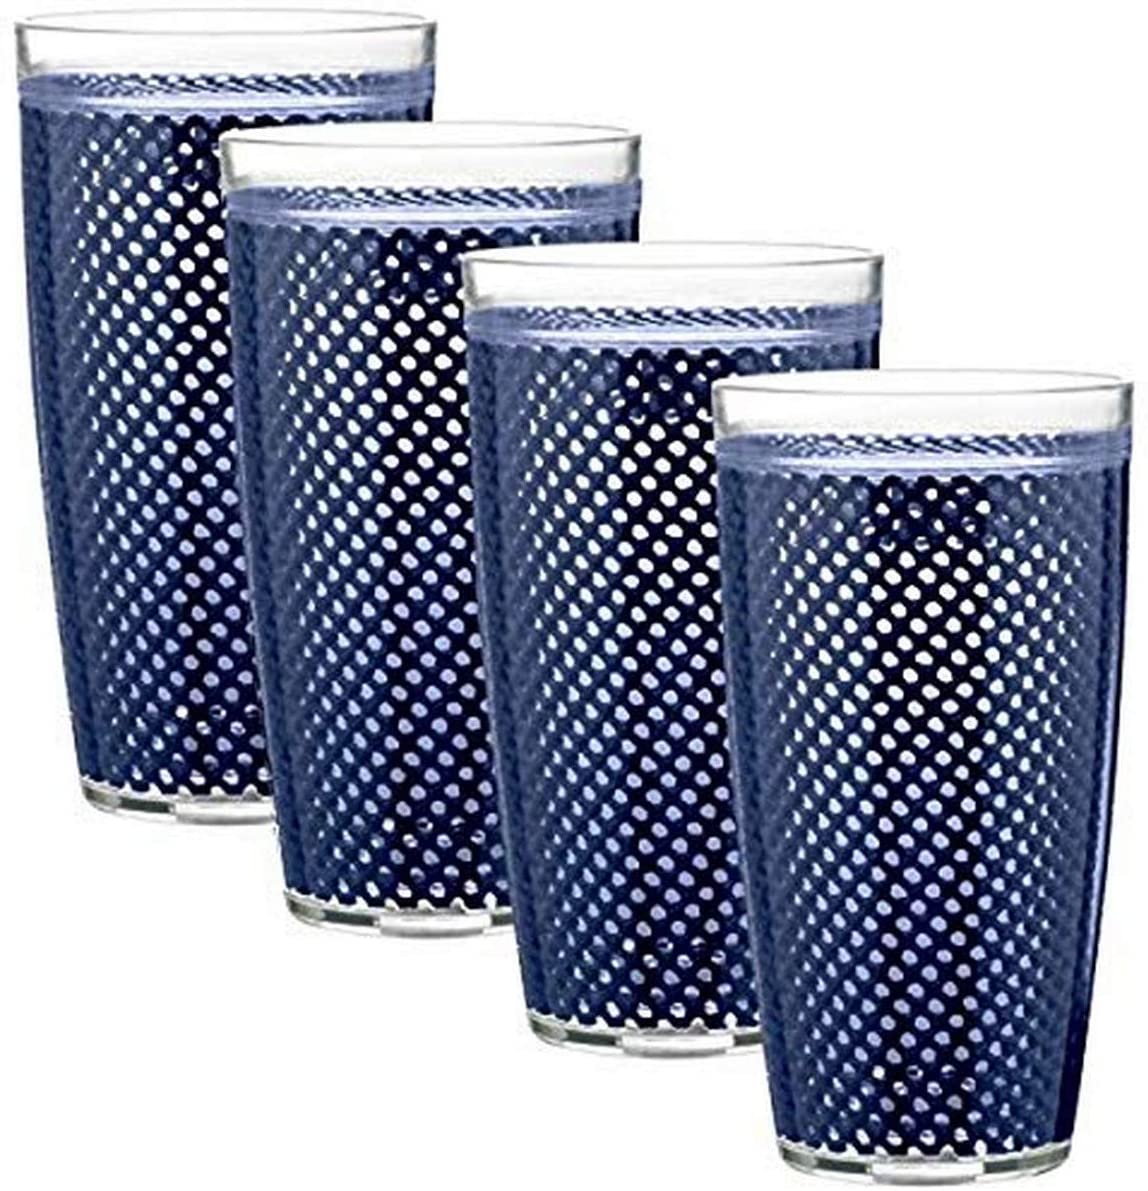 Kraftware The Fishnet Collection Doublewall Drinkware, Set of 4, 4 Count (Pack of 1), Navy Blue